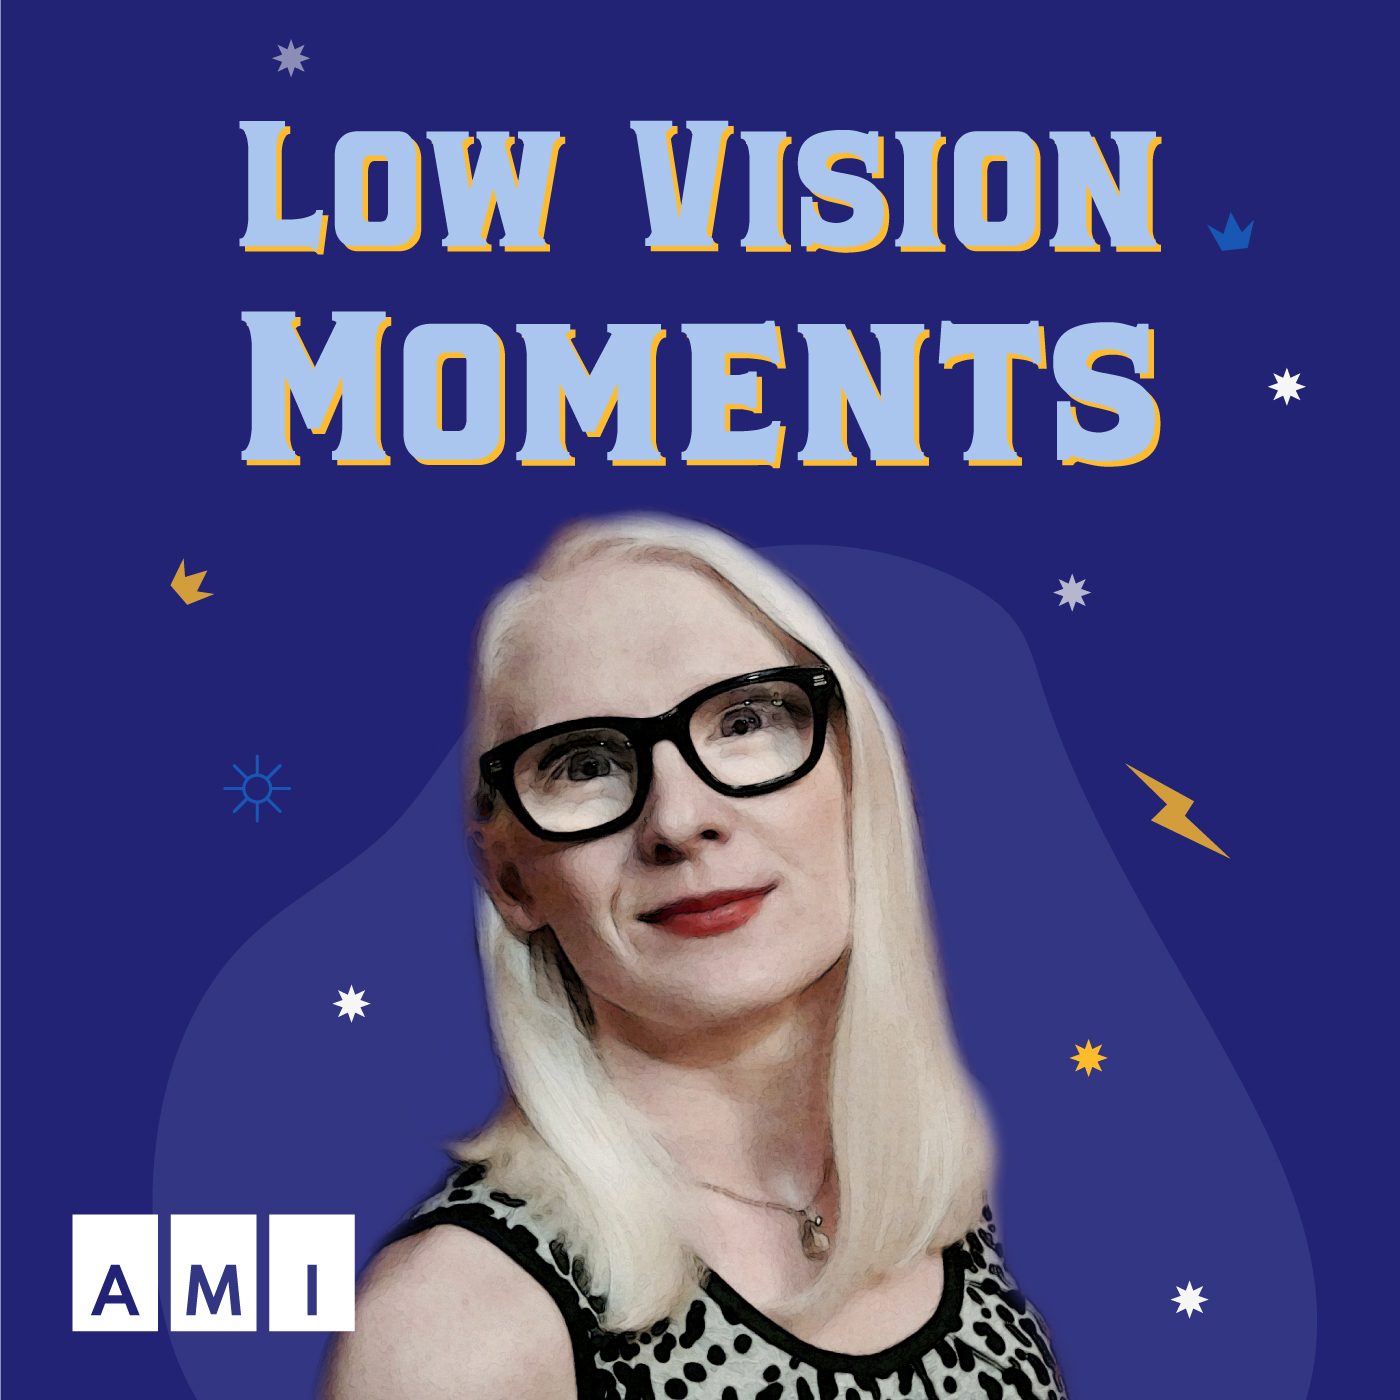 The Low Vison Moments podcast logo